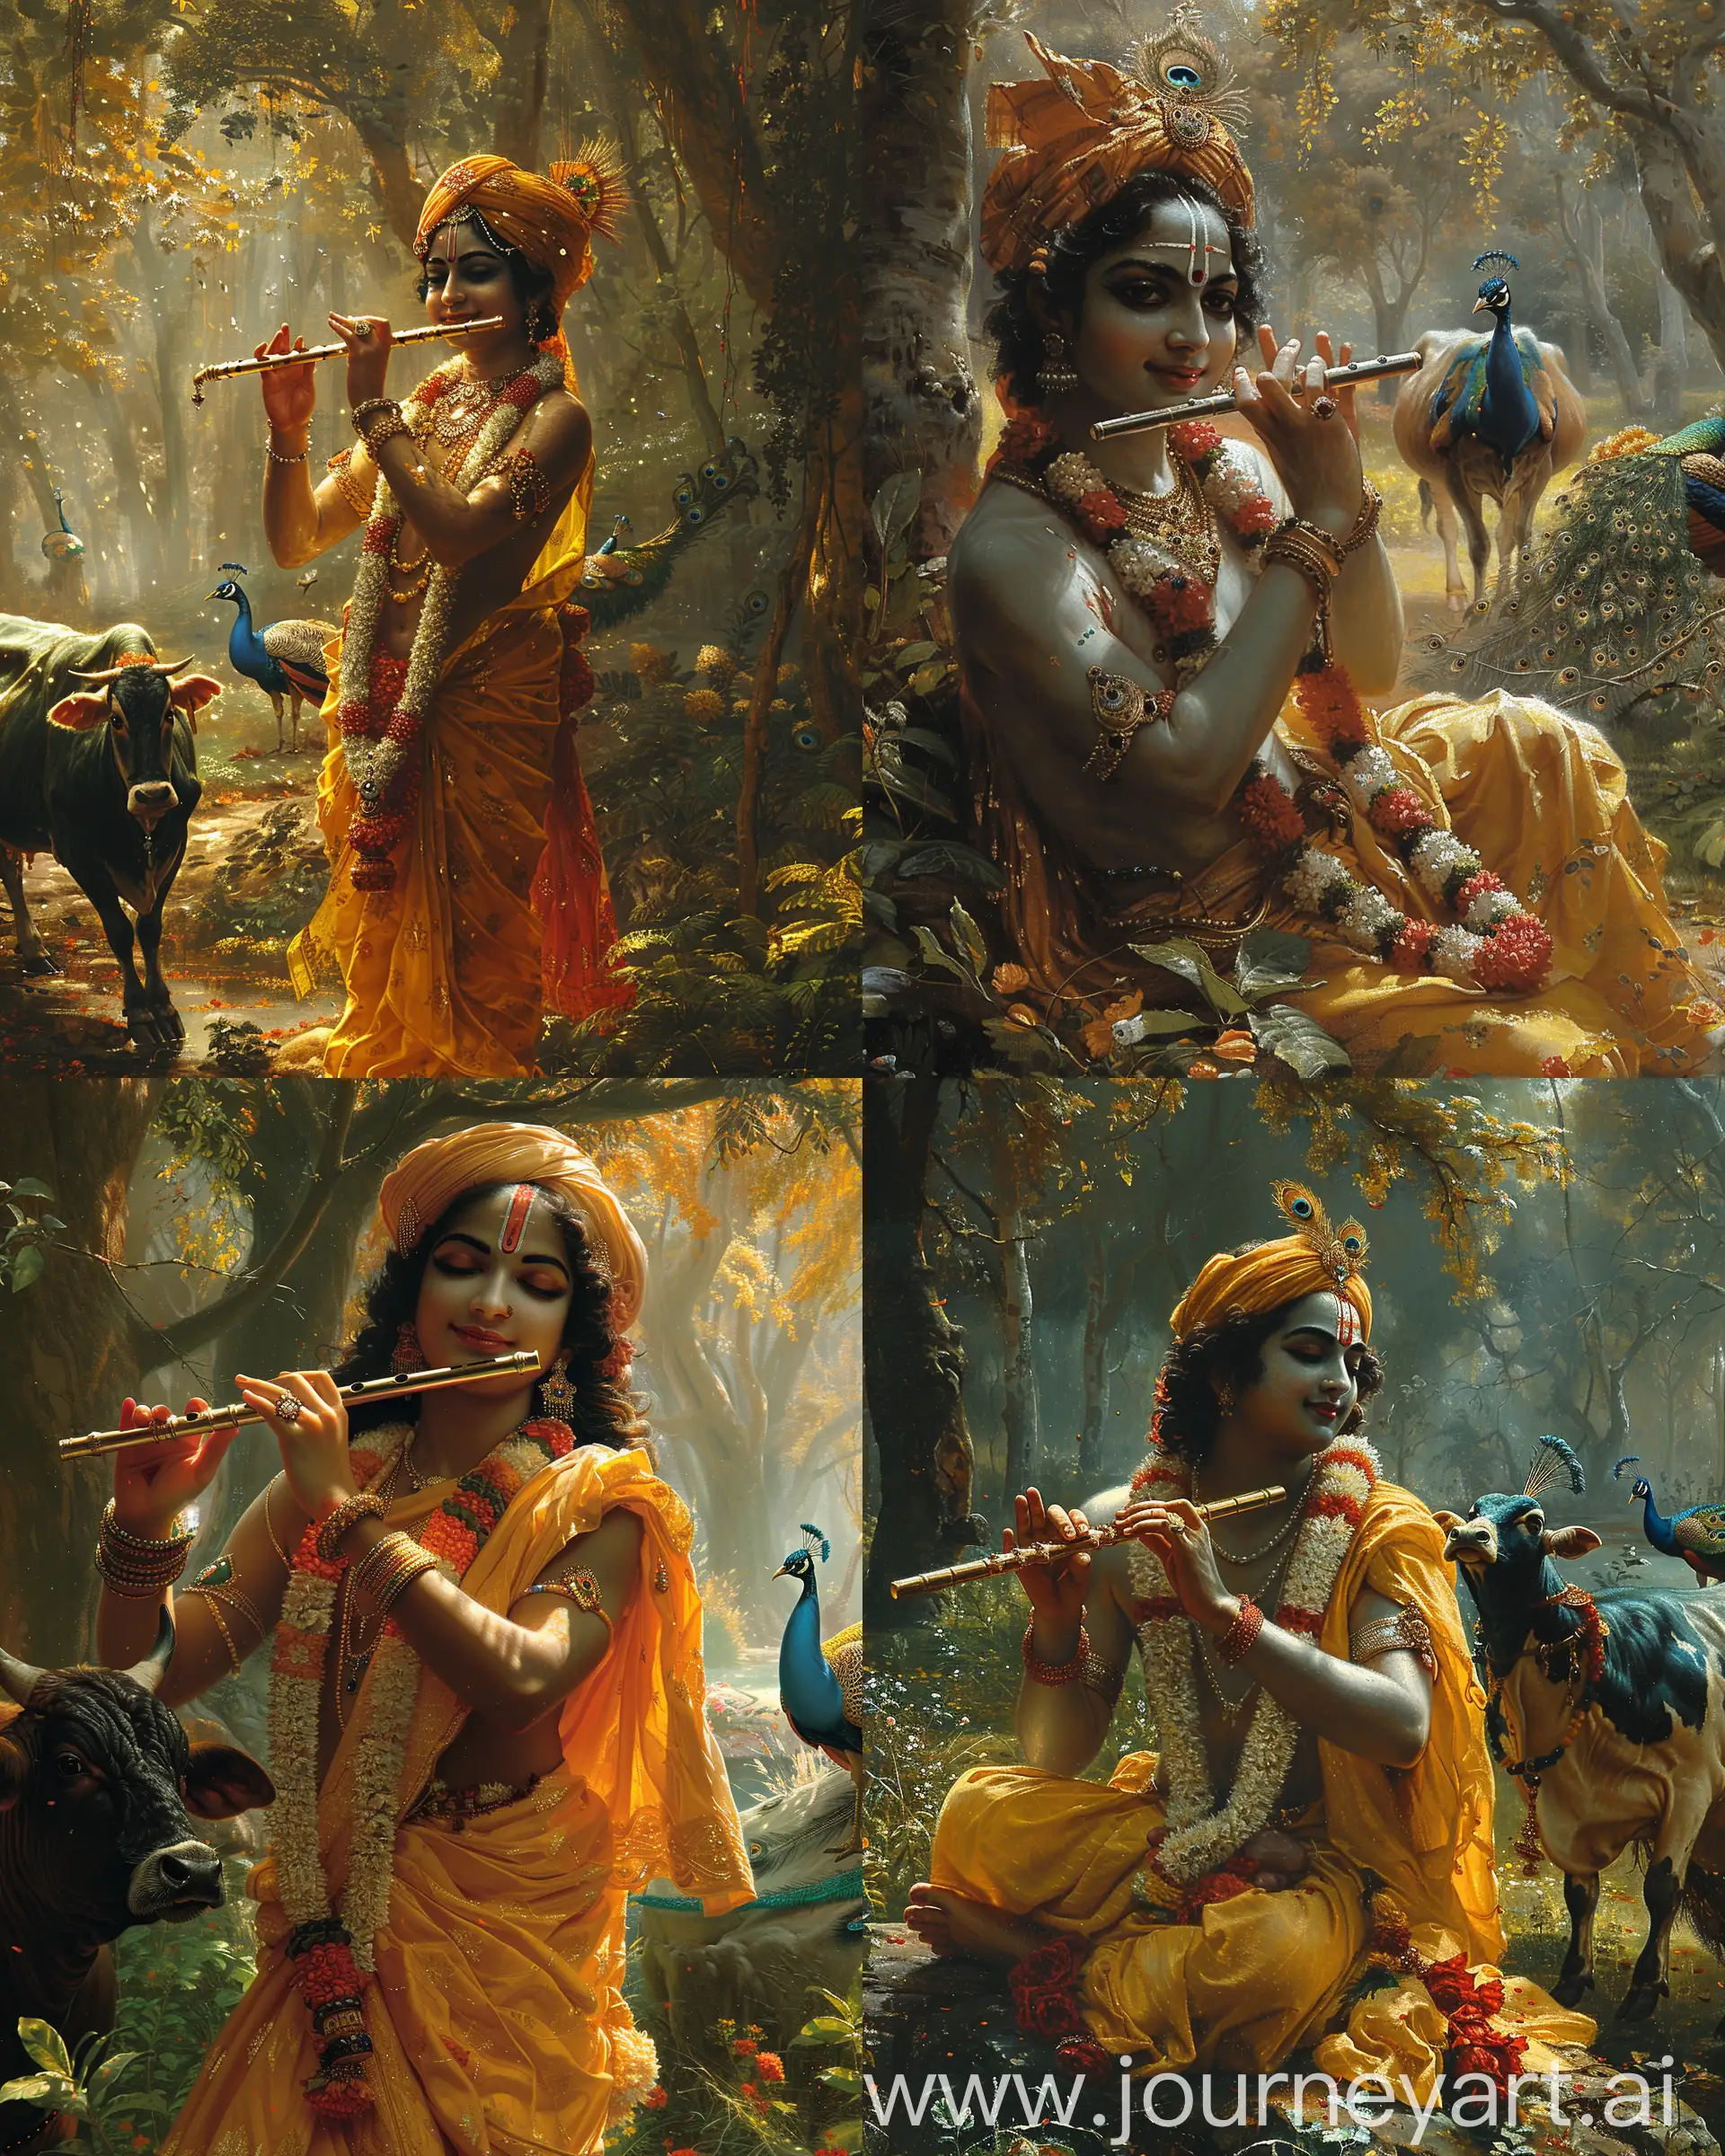 Handsome, serene smile, Lord Krishna with a divine glow in a tranquil forest, playing the flute, accompanied by his sacred cow, under a canopy of lush trees, soft dappled sunlight, peacocks in the background, traditional attire, realistic digital oil painting with attention to texture and vibrant colors typical of Rajasthani miniature art --ar 4:5 --s 750 --v 6